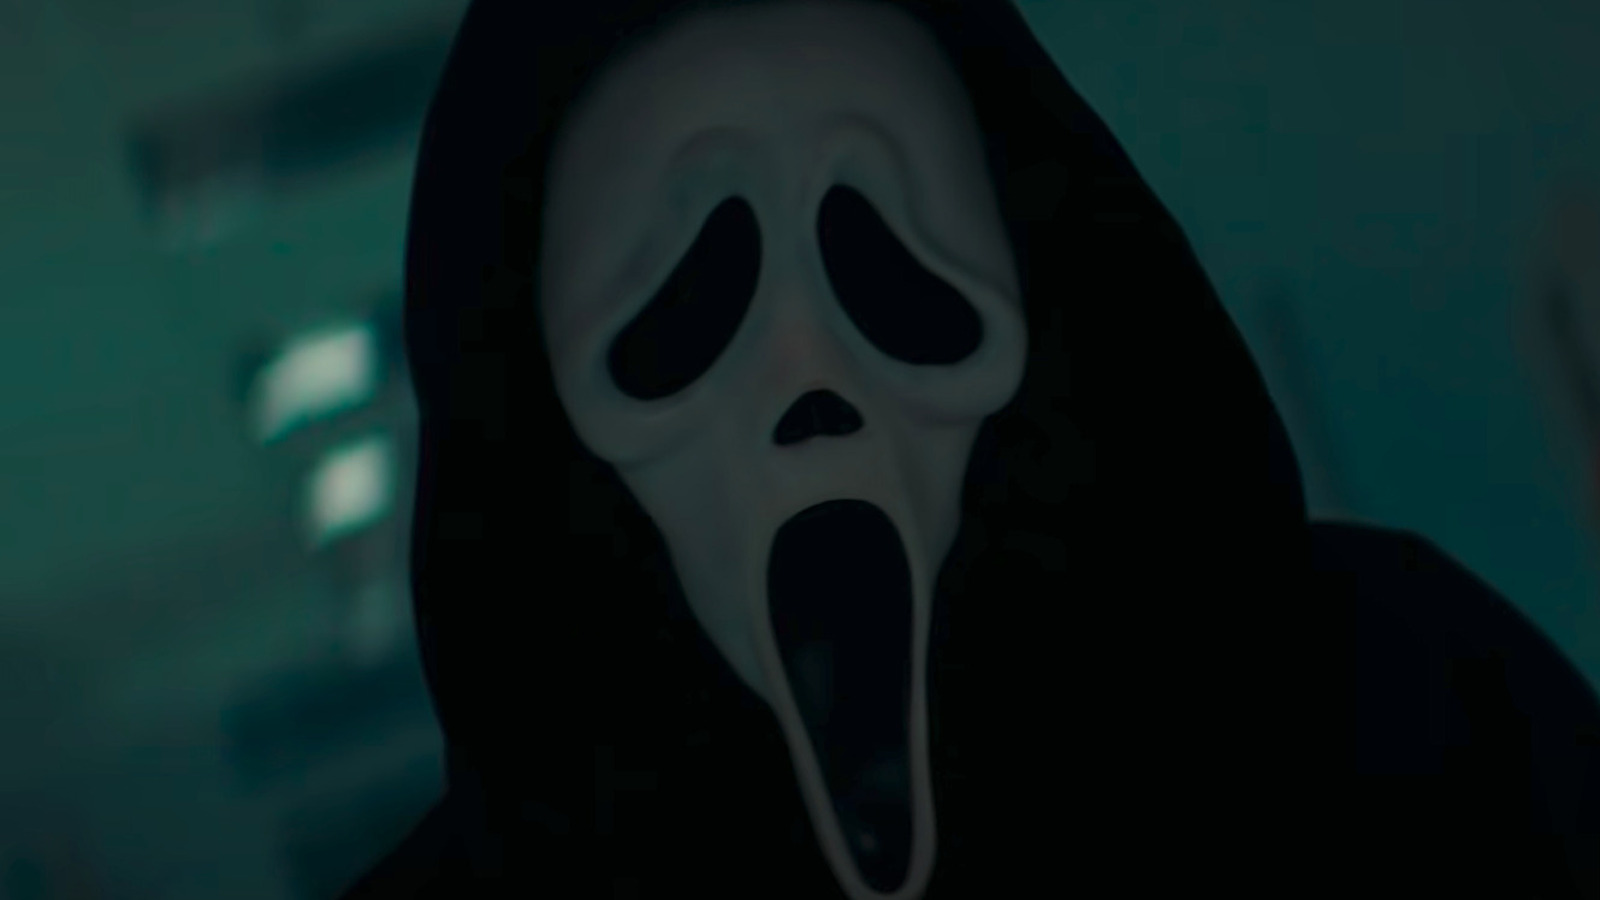 Finally The Of The Ghostface Mask Scream